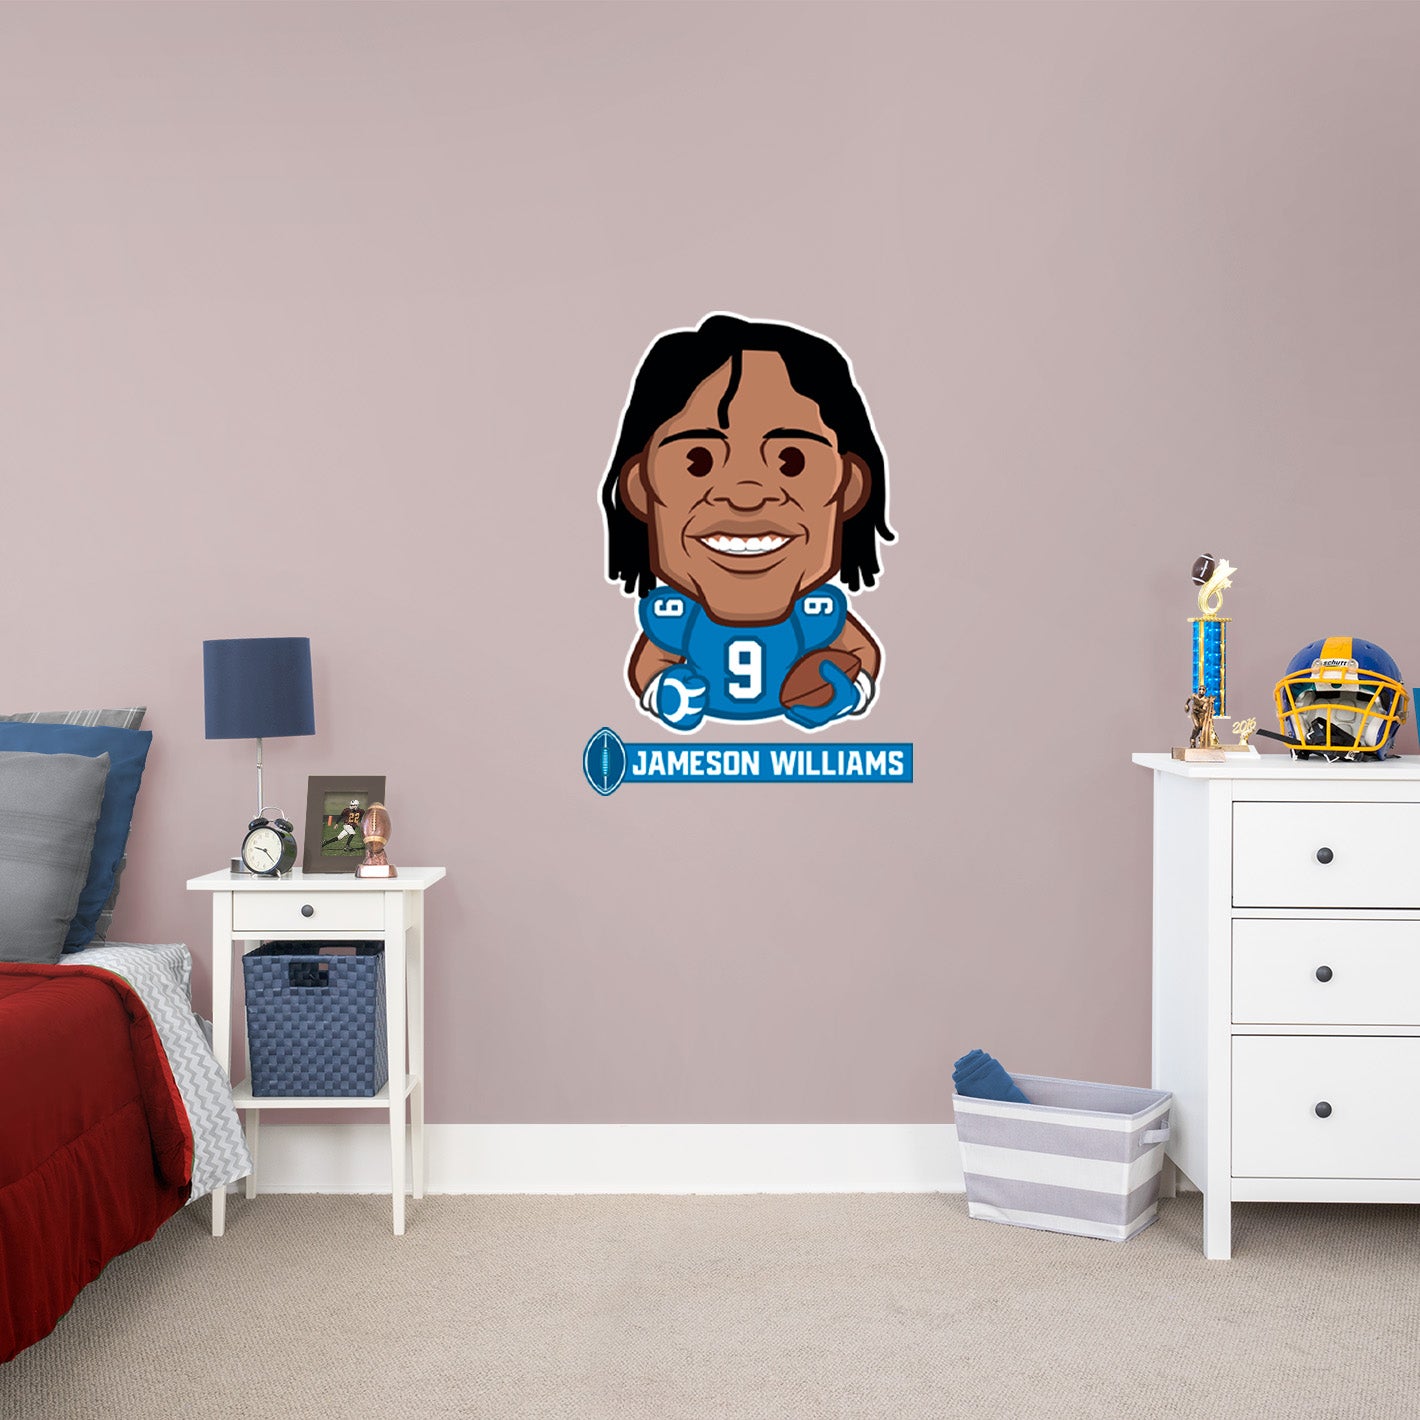 Detroit Lions: Jameson Williams Emoji - Officially Licensed NFLPA Removable Adhesive Decal